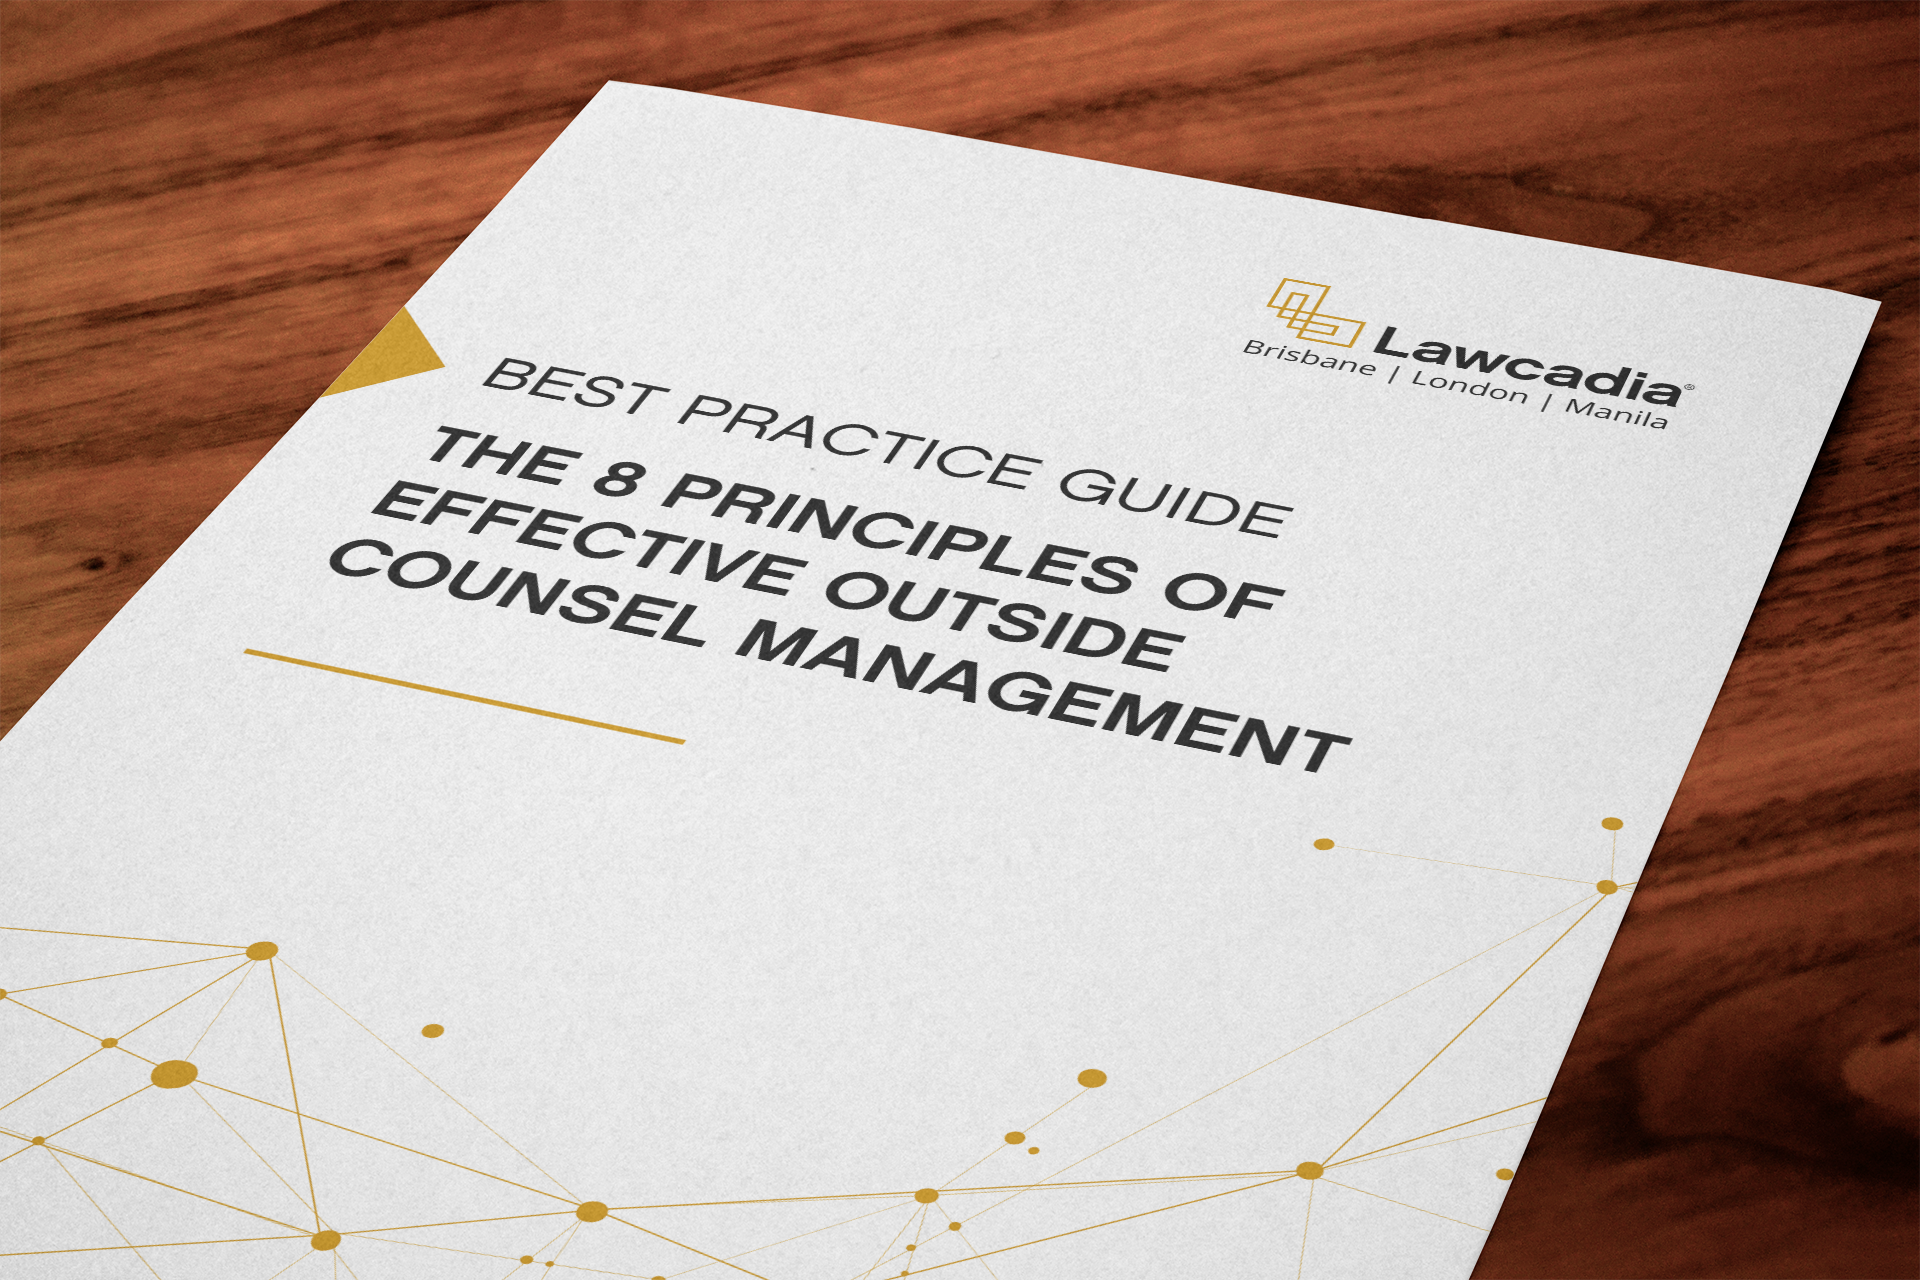 Best Practice Guide To Outside Counsel Management